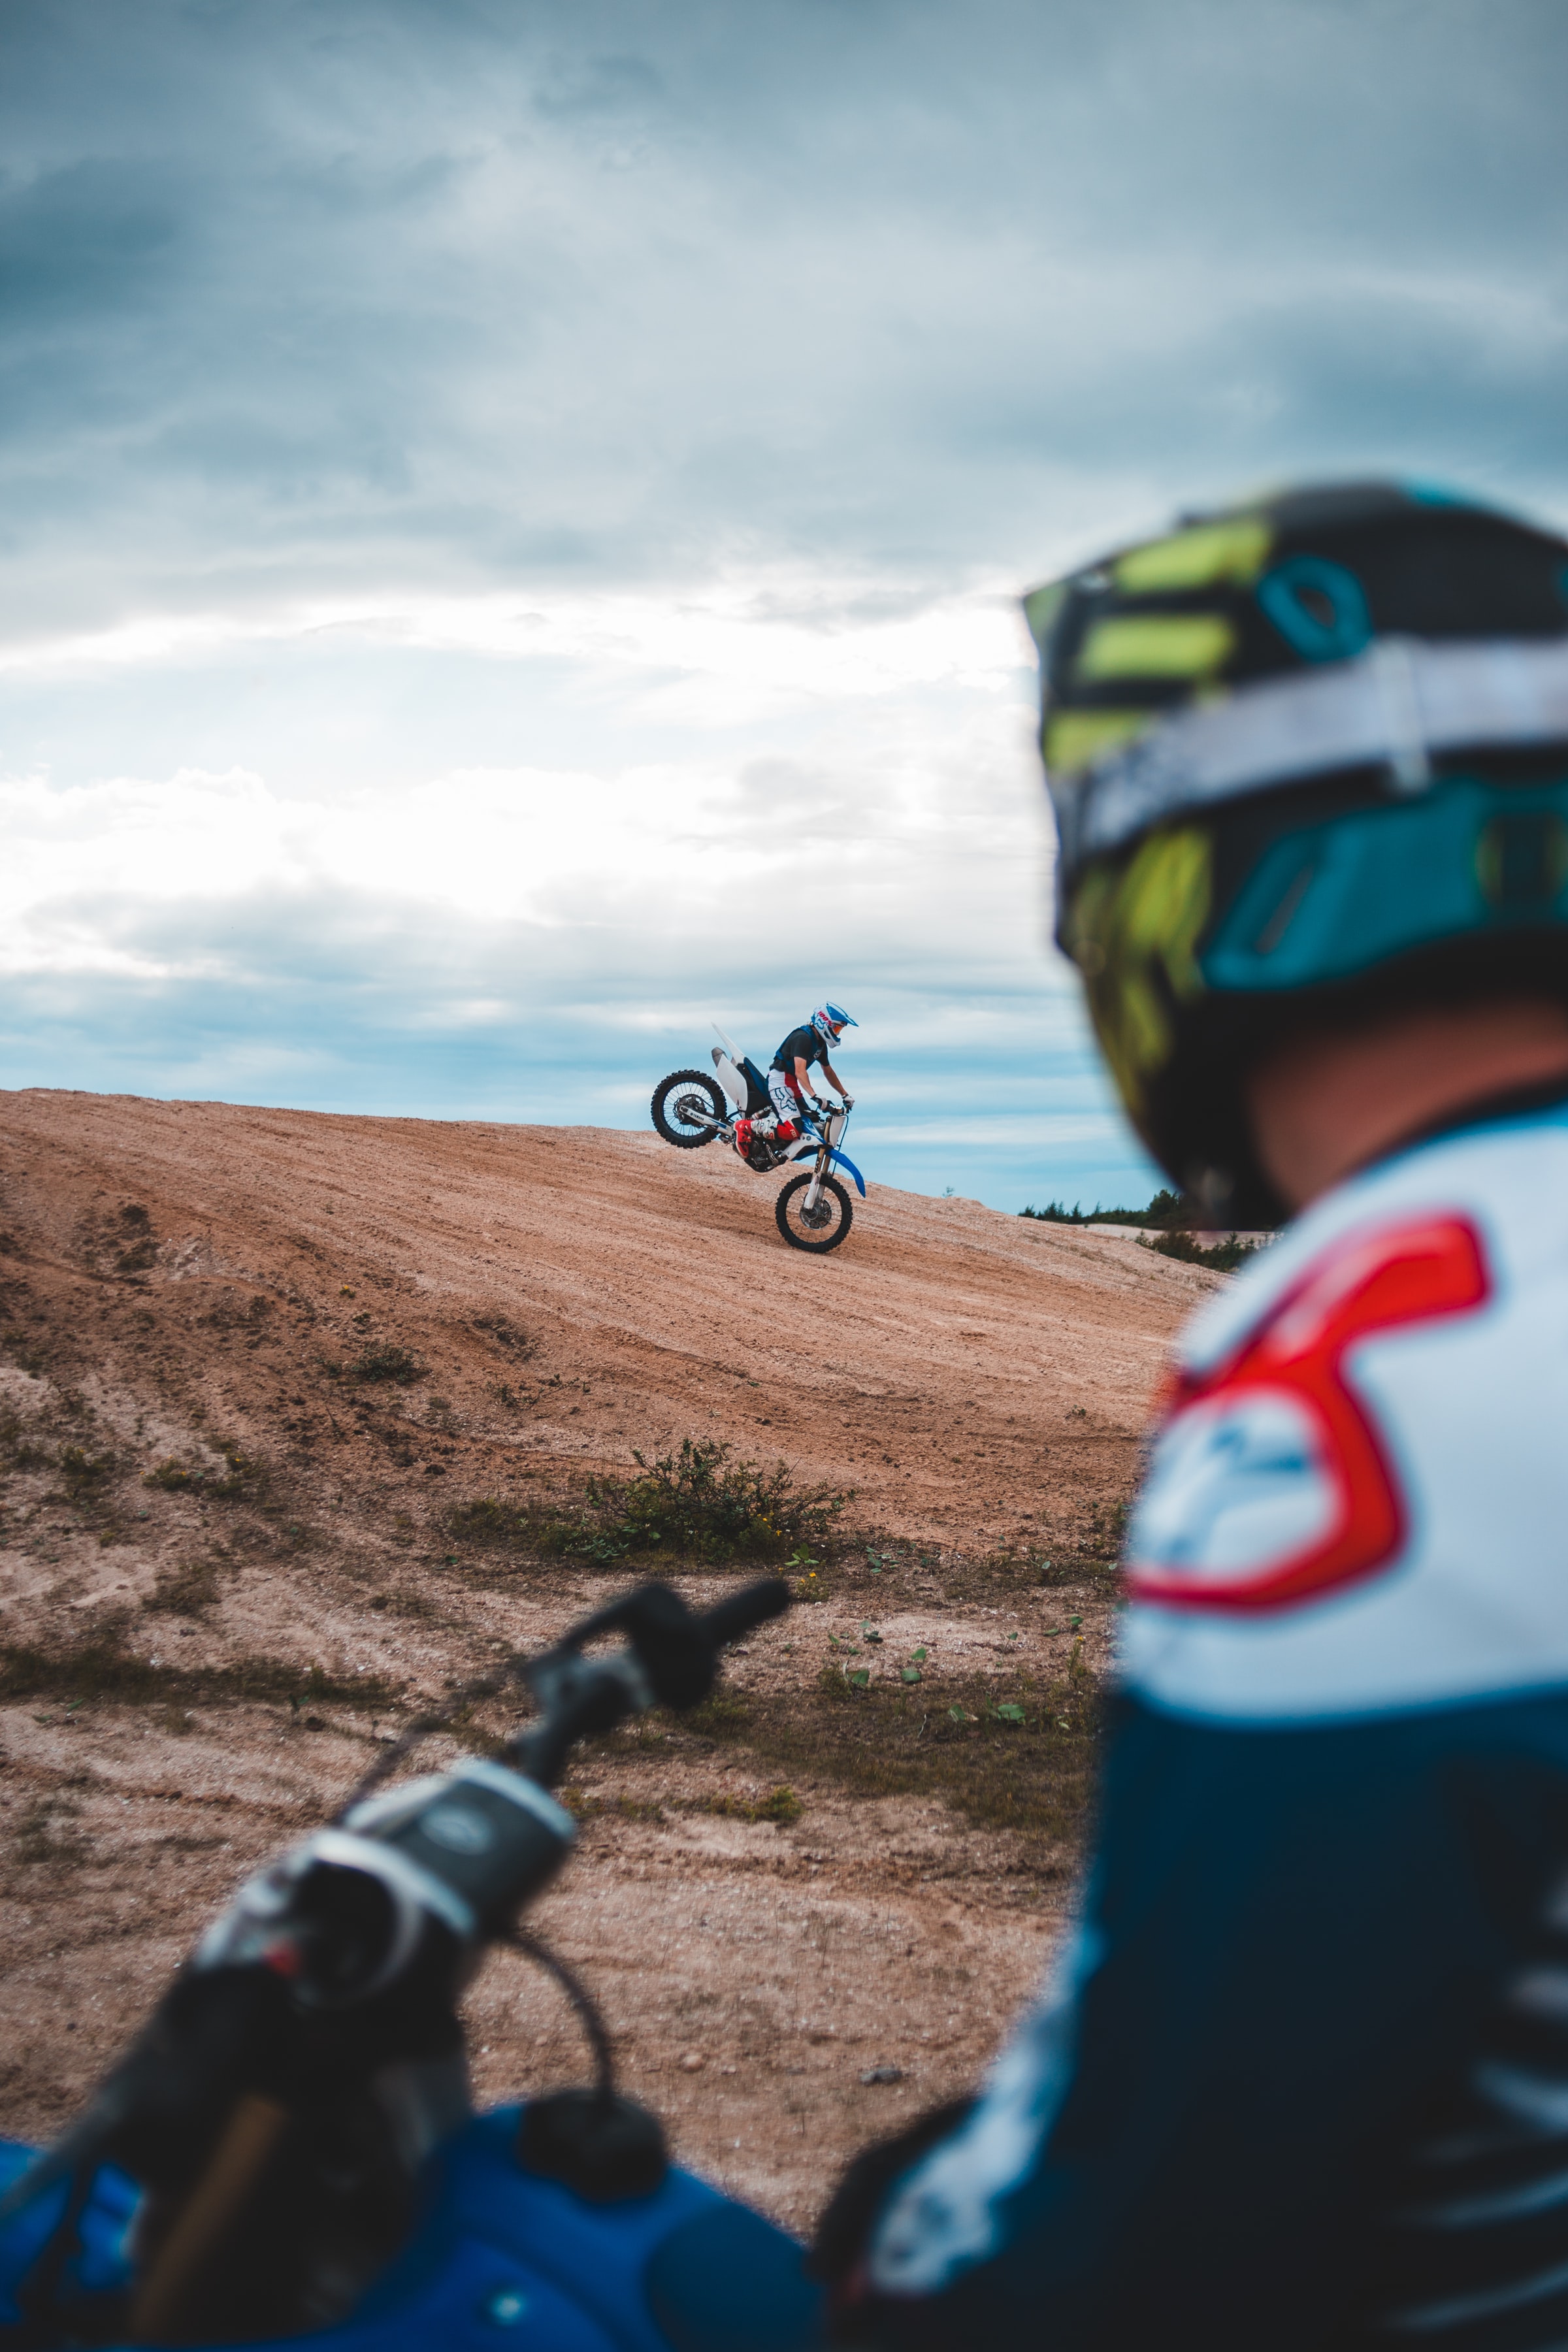 sand, motorcycles, motorcycle, slope, trick, motorcyclists